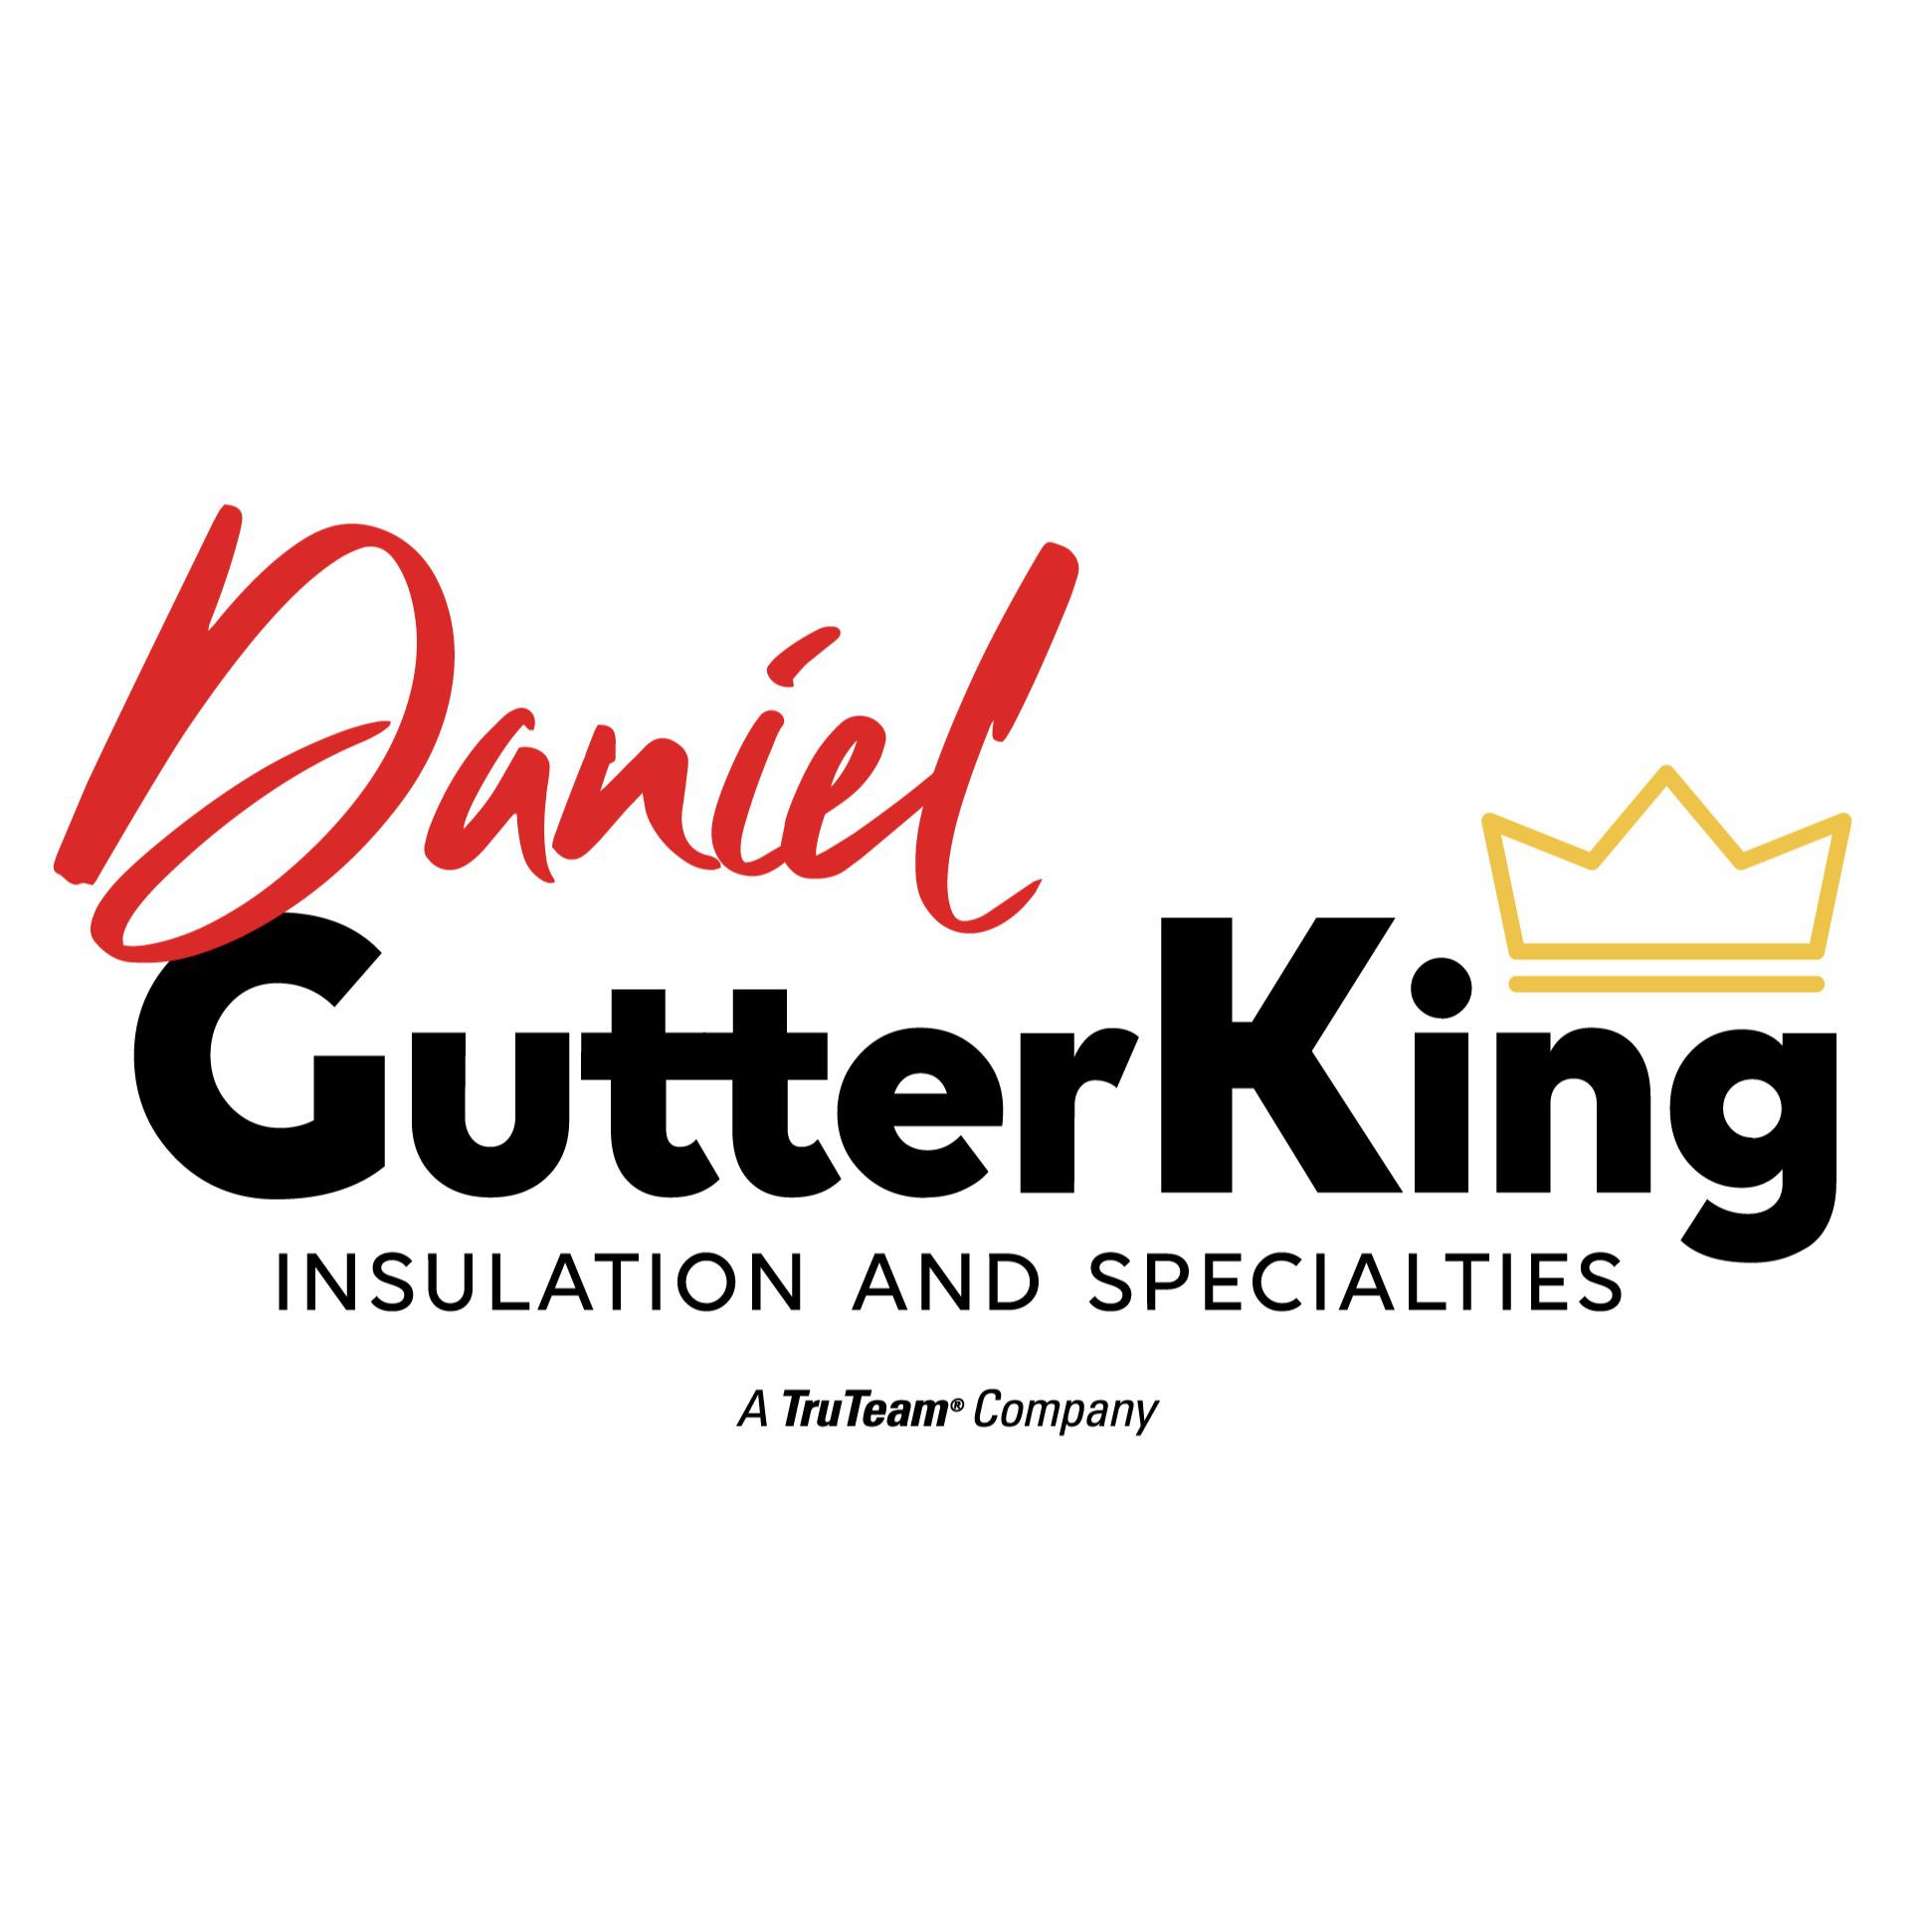 Daniel/Gutter King Insulation and Specialties